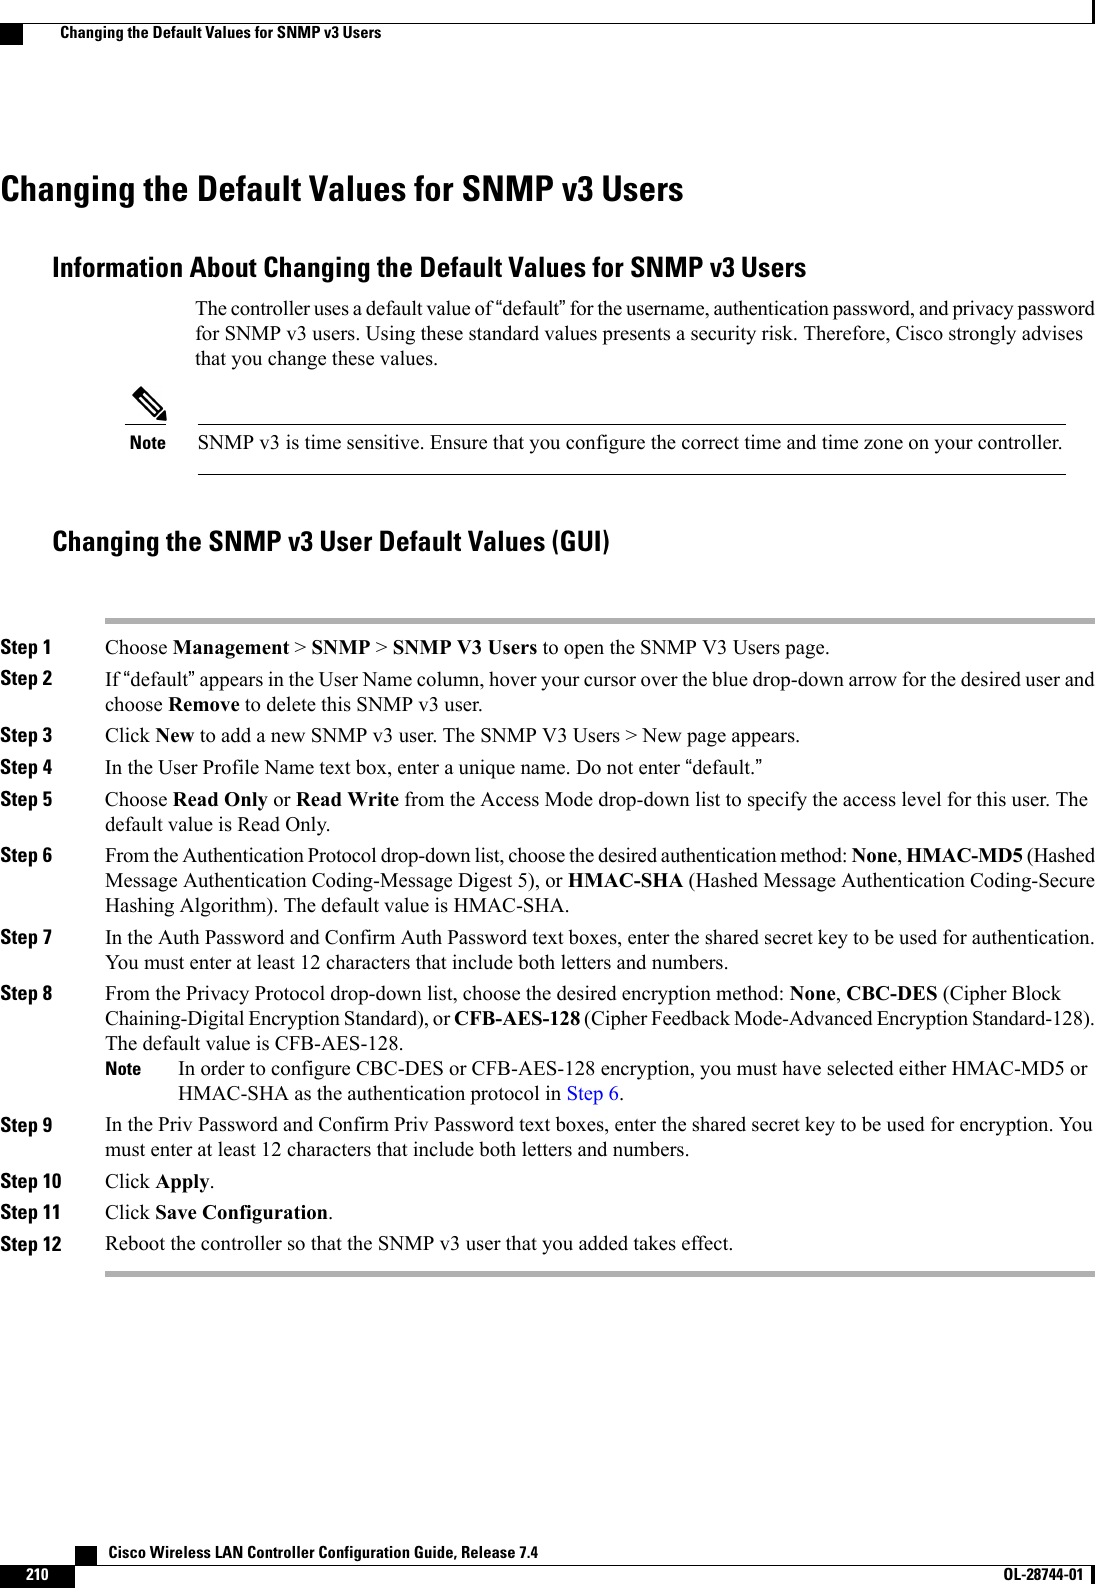 Changing the Default Values for SNMP v3 UsersInformation About Changing the Default Values for SNMP v3 UsersThe controller uses a default value of “default”for the username, authentication password, and privacy passwordfor SNMP v3 users. Using these standard values presents a security risk. Therefore, Cisco strongly advisesthat you change these values.SNMP v3 is time sensitive. Ensure that you configure the correct time and time zone on your controller.NoteChanging the SNMP v3 User Default Values (GUI)Step 1 Choose Management &gt;SNMP &gt;SNMP V3 Users to open the SNMP V3 Users page.Step 2 If “default”appears in the User Name column, hover your cursor over the blue drop-down arrow for the desired user andchoose Remove to delete this SNMP v3 user.Step 3 Click New to add a new SNMP v3 user. The SNMP V3 Users &gt; New page appears.Step 4 In the User Profile Name text box, enter a unique name. Do not enter “default.”Step 5 Choose Read Only or Read Write from the Access Mode drop-down list to specify the access level for this user. Thedefault value is Read Only.Step 6 From the Authentication Protocol drop-down list, choose the desired authentication method: None,HMAC-MD5 (HashedMessage Authentication Coding-Message Digest 5), or HMAC-SHA (Hashed Message Authentication Coding-SecureHashing Algorithm). The default value is HMAC-SHA.Step 7 In the Auth Password and Confirm Auth Password text boxes, enter the shared secret key to be used for authentication.You must enter at least 12 characters that include both letters and numbers.Step 8 From the Privacy Protocol drop-down list, choose the desired encryption method: None,CBC-DES (Cipher BlockChaining-Digital Encryption Standard), or CFB-AES-128 (Cipher Feedback Mode-Advanced Encryption Standard-128).The default value is CFB-AES-128.In order to configure CBC-DES or CFB-AES-128 encryption, you must have selected either HMAC-MD5 orHMAC-SHA as the authentication protocol in Step 6.NoteStep 9 In the Priv Password and Confirm Priv Password text boxes, enter the shared secret key to be used for encryption. Youmust enter at least 12 characters that include both letters and numbers.Step 10 Click Apply.Step 11 Click Save Configuration.Step 12 Reboot the controller so that the SNMP v3 user that you added takes effect.   Cisco Wireless LAN Controller Configuration Guide, Release 7.4210 OL-28744-01  Changing the Default Values for SNMP v3 Users